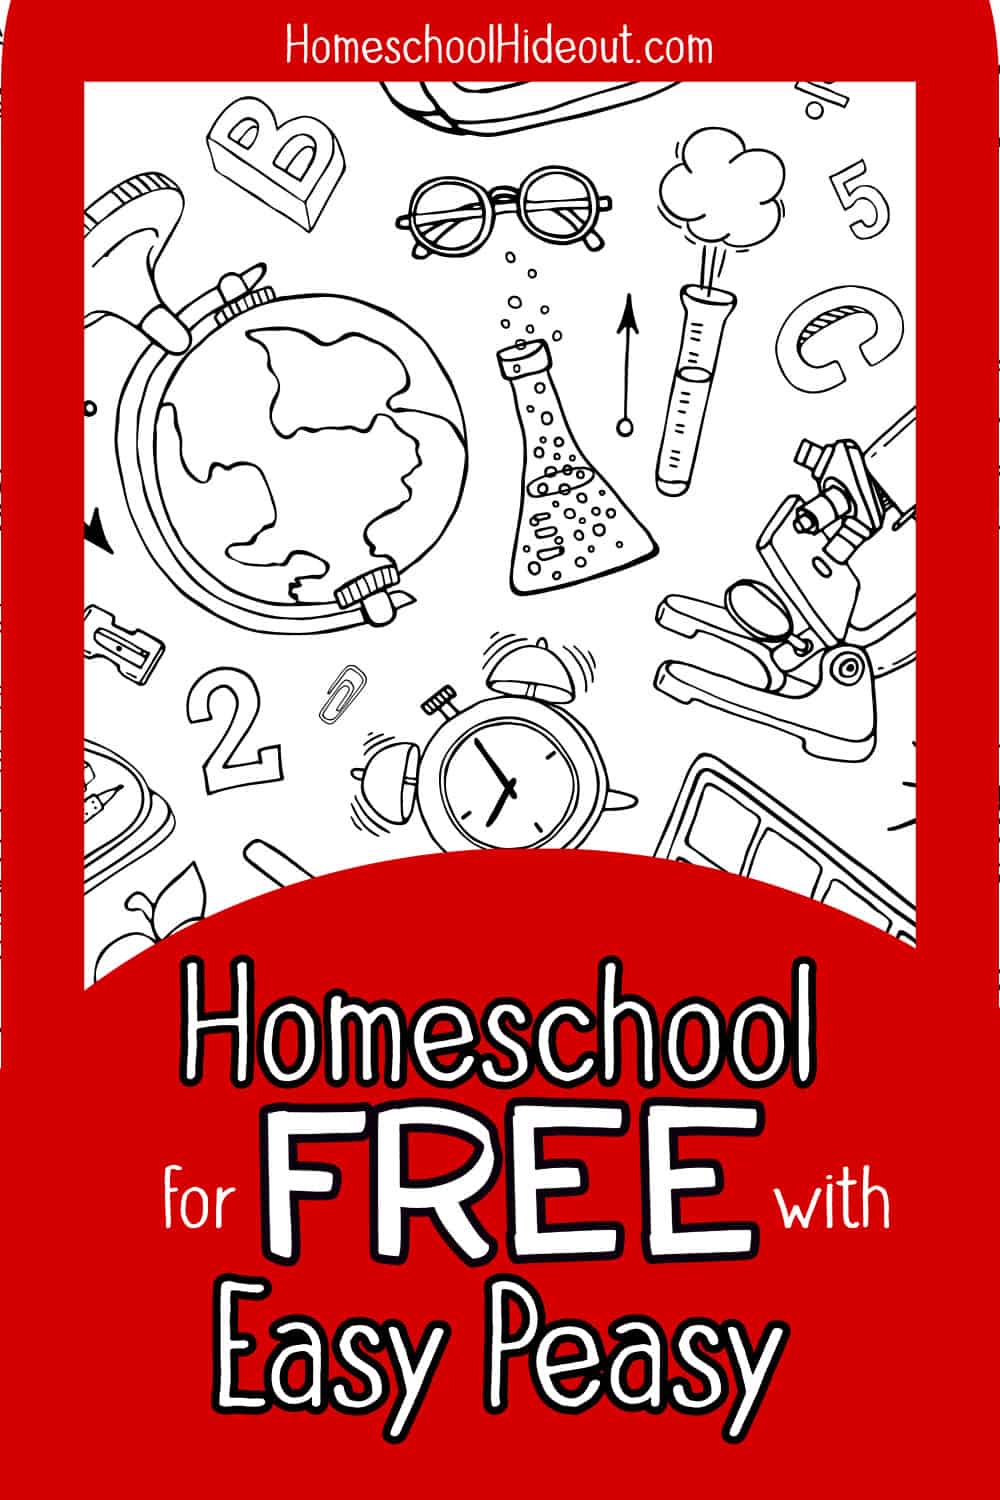 I wish I had known this sooner! I can actually homeschool for FREE using Easy Peasy! How awesome!!!